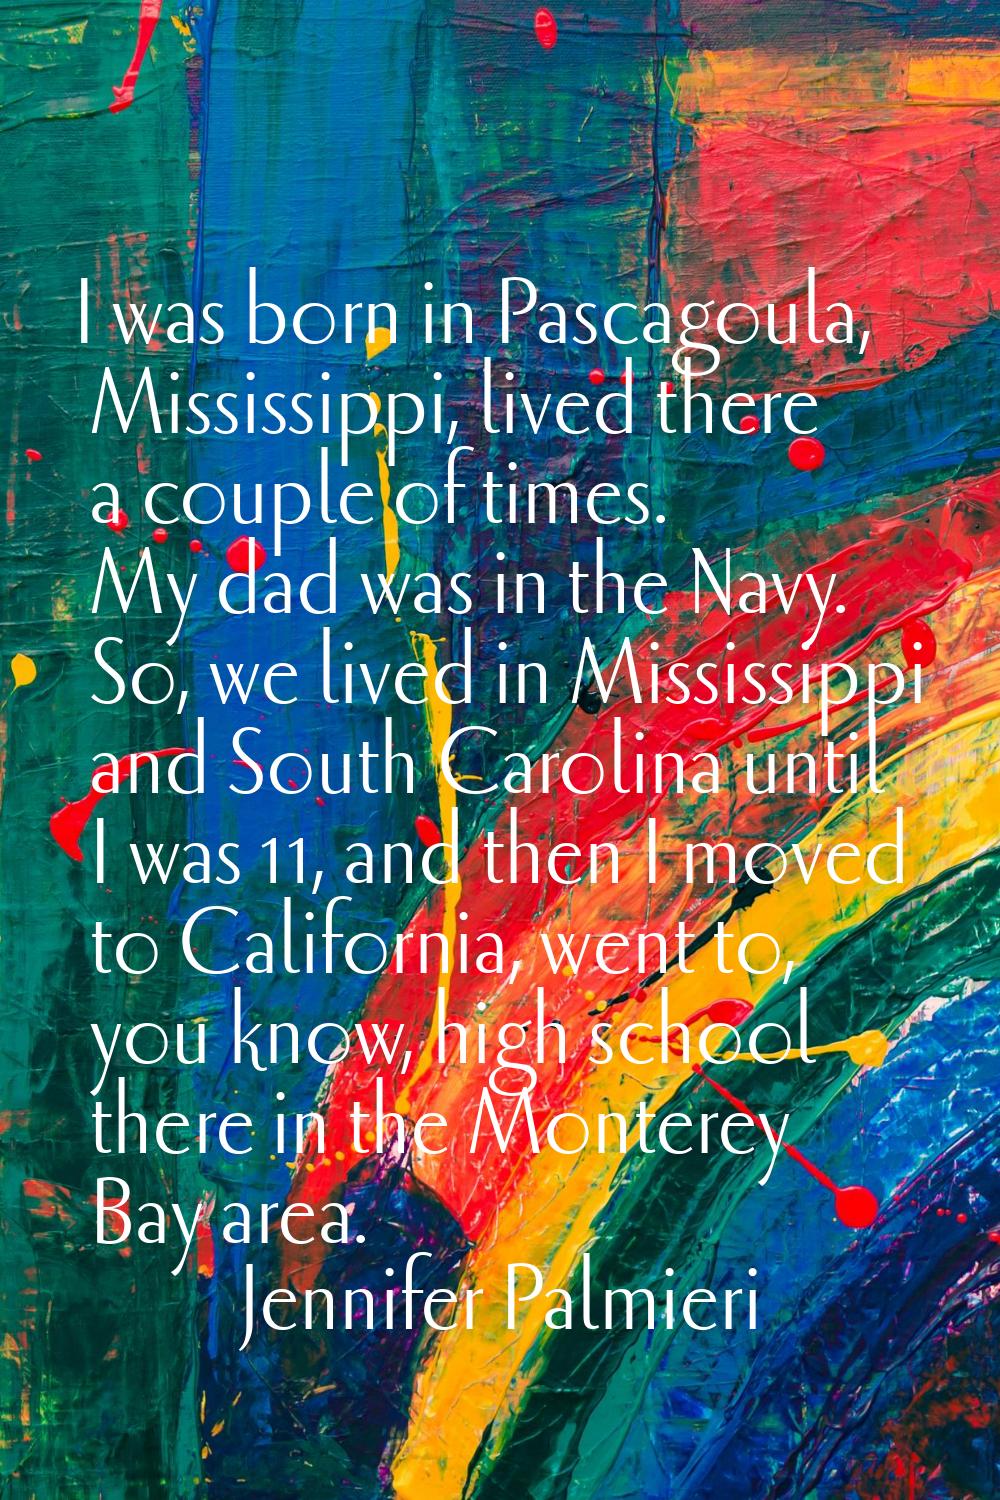 I was born in Pascagoula, Mississippi, lived there a couple of times. My dad was in the Navy. So, w